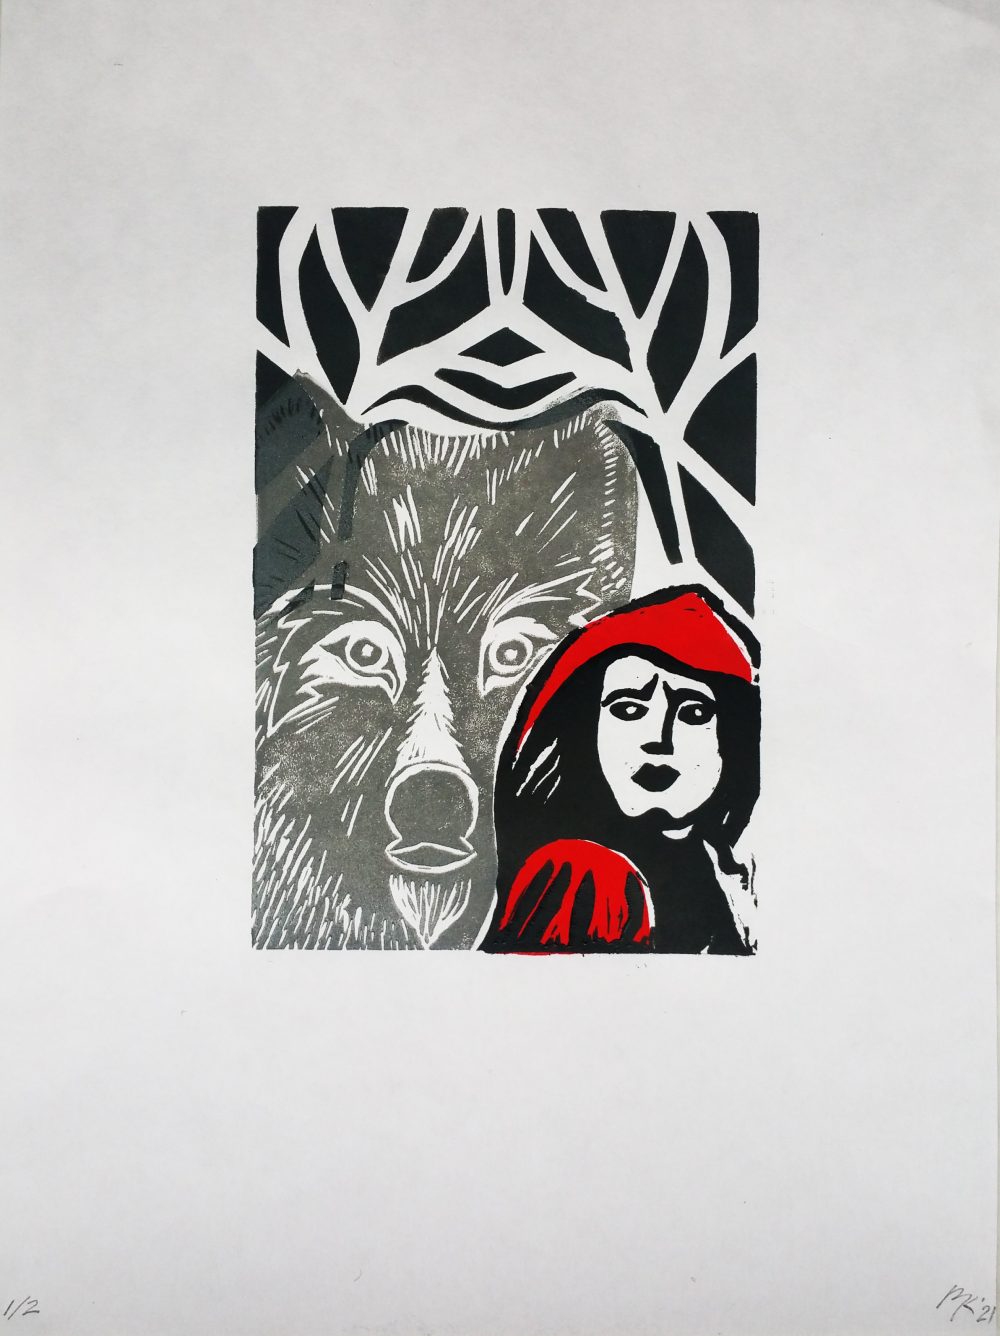 A print in black, gray, red, and white, with a woman wearing a red hood in the foreground, looking over her shoulder to see a large wolf behind her. In the background is a dark forest.